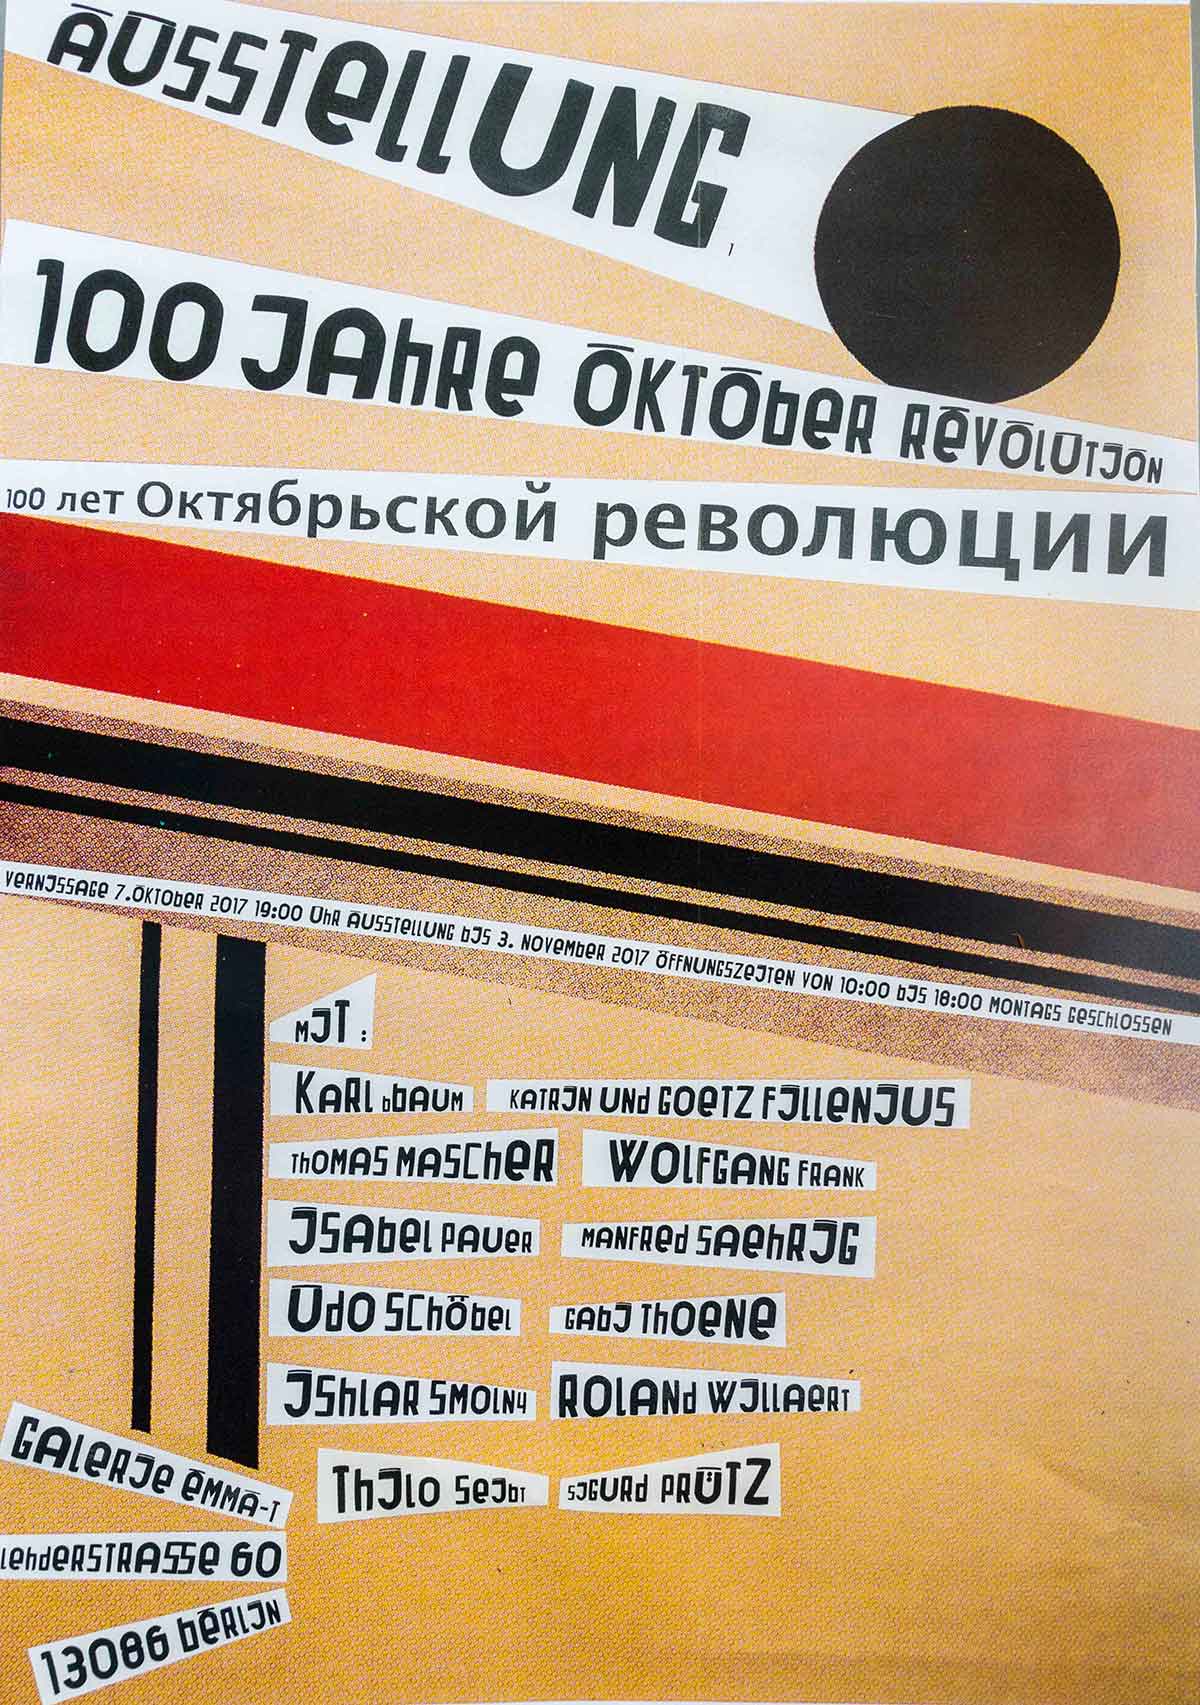 Opening “100 Years October Revolution” at 07.10.2017